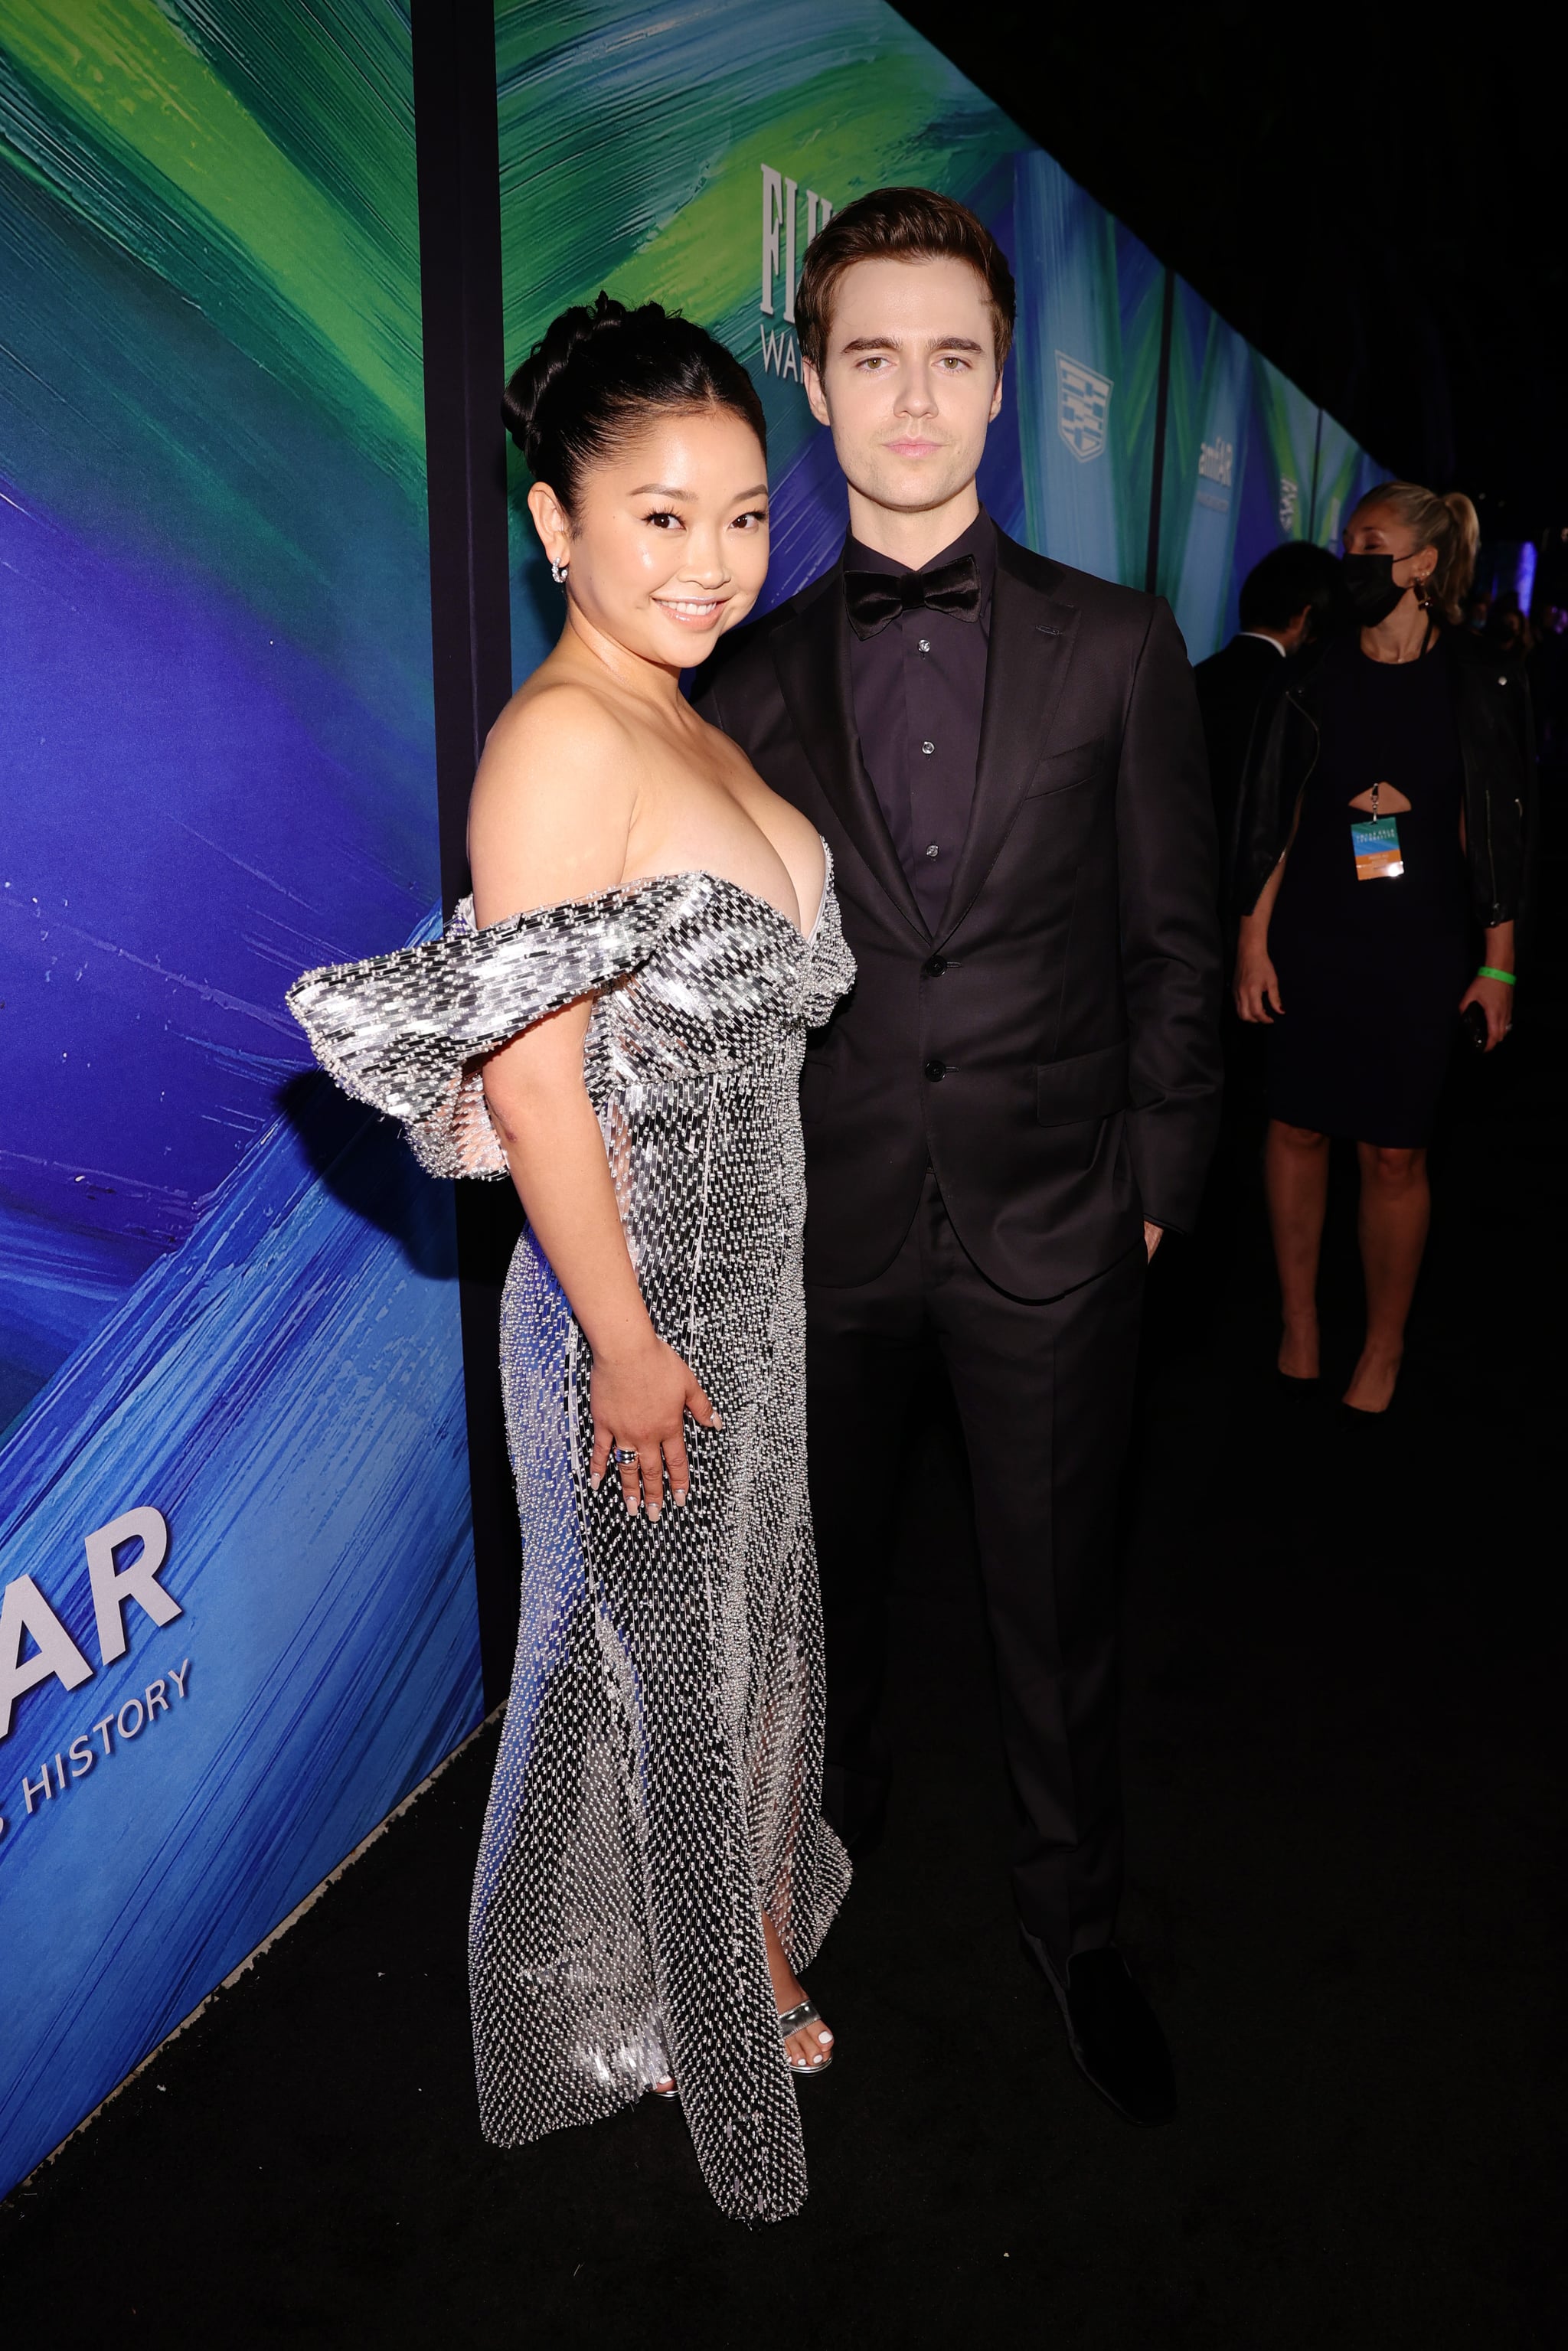 WEST HOLLYWOOD, CALIFORNIA - NOVEMBER 04: (L-R) Lana Condor and Anthony De La Torre attend the amfAR Gala Los Angeles 2021 honouring TikTok and Jeremy Scott at Pacific Design Centre on November 04, 2021 in West Hollywood, California. (Photo by Rich Fury/amfAR/Getty Images for amfAR)